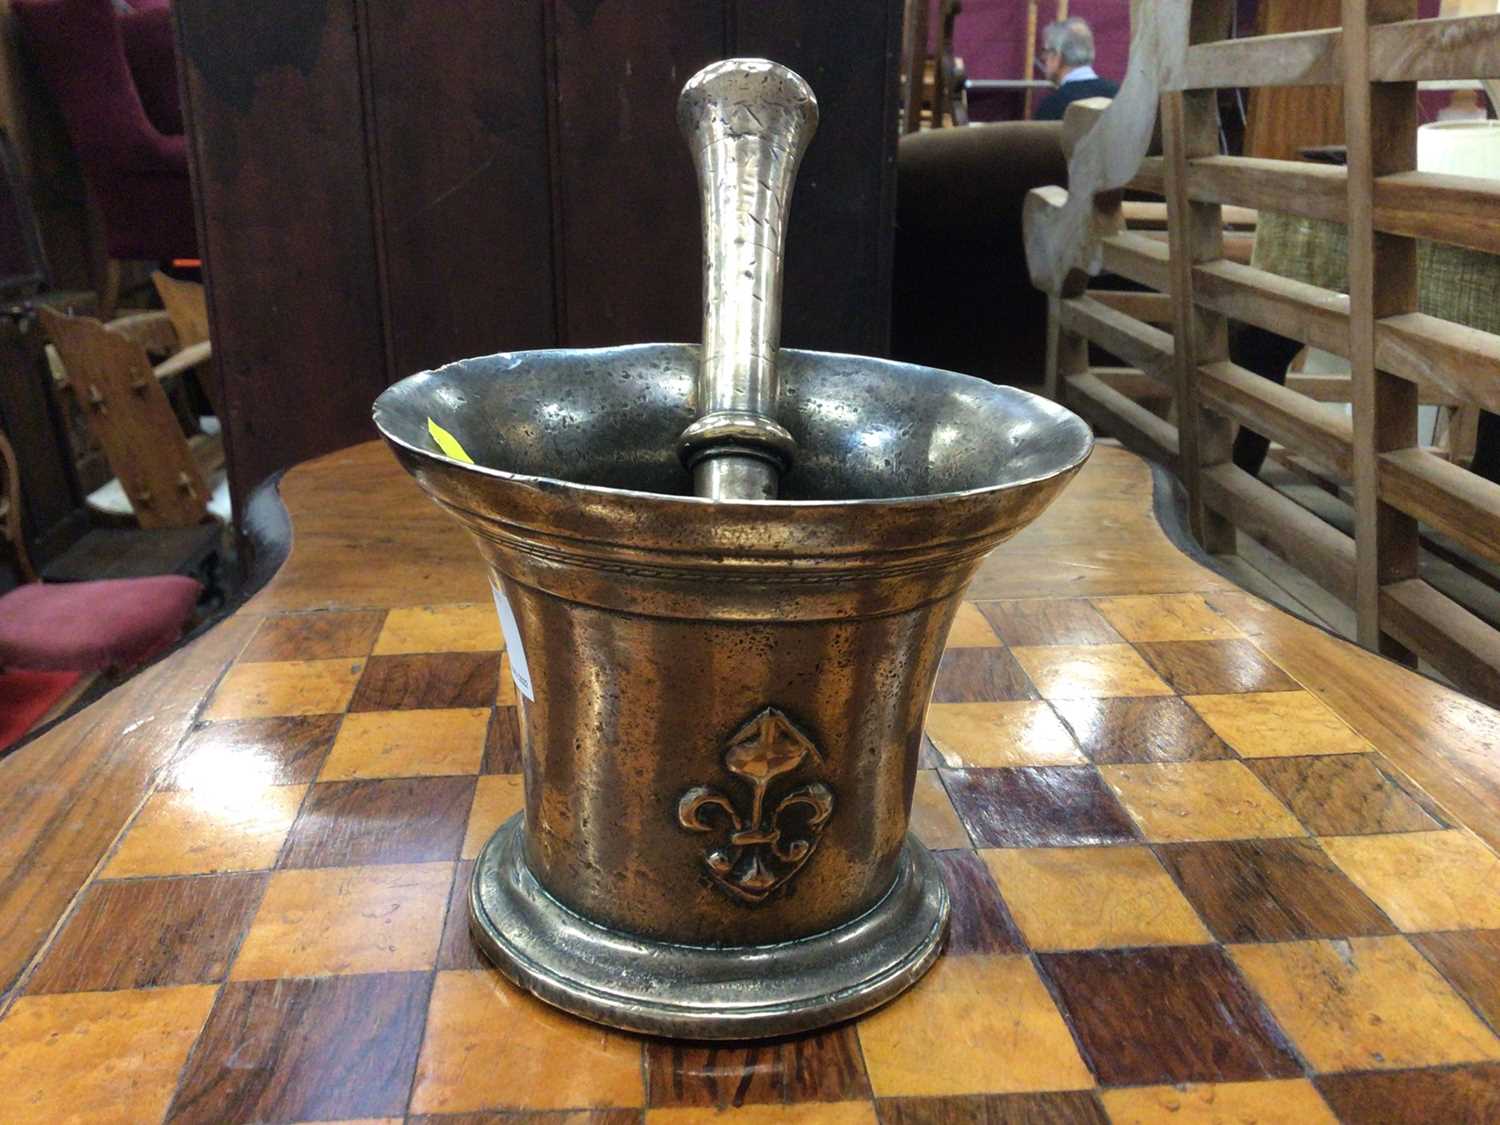 Lot 75 - Antique bell metal pestle and mortar, the mortar which a raised fleur-de-lys on each side, the pestle engraved 'AD'